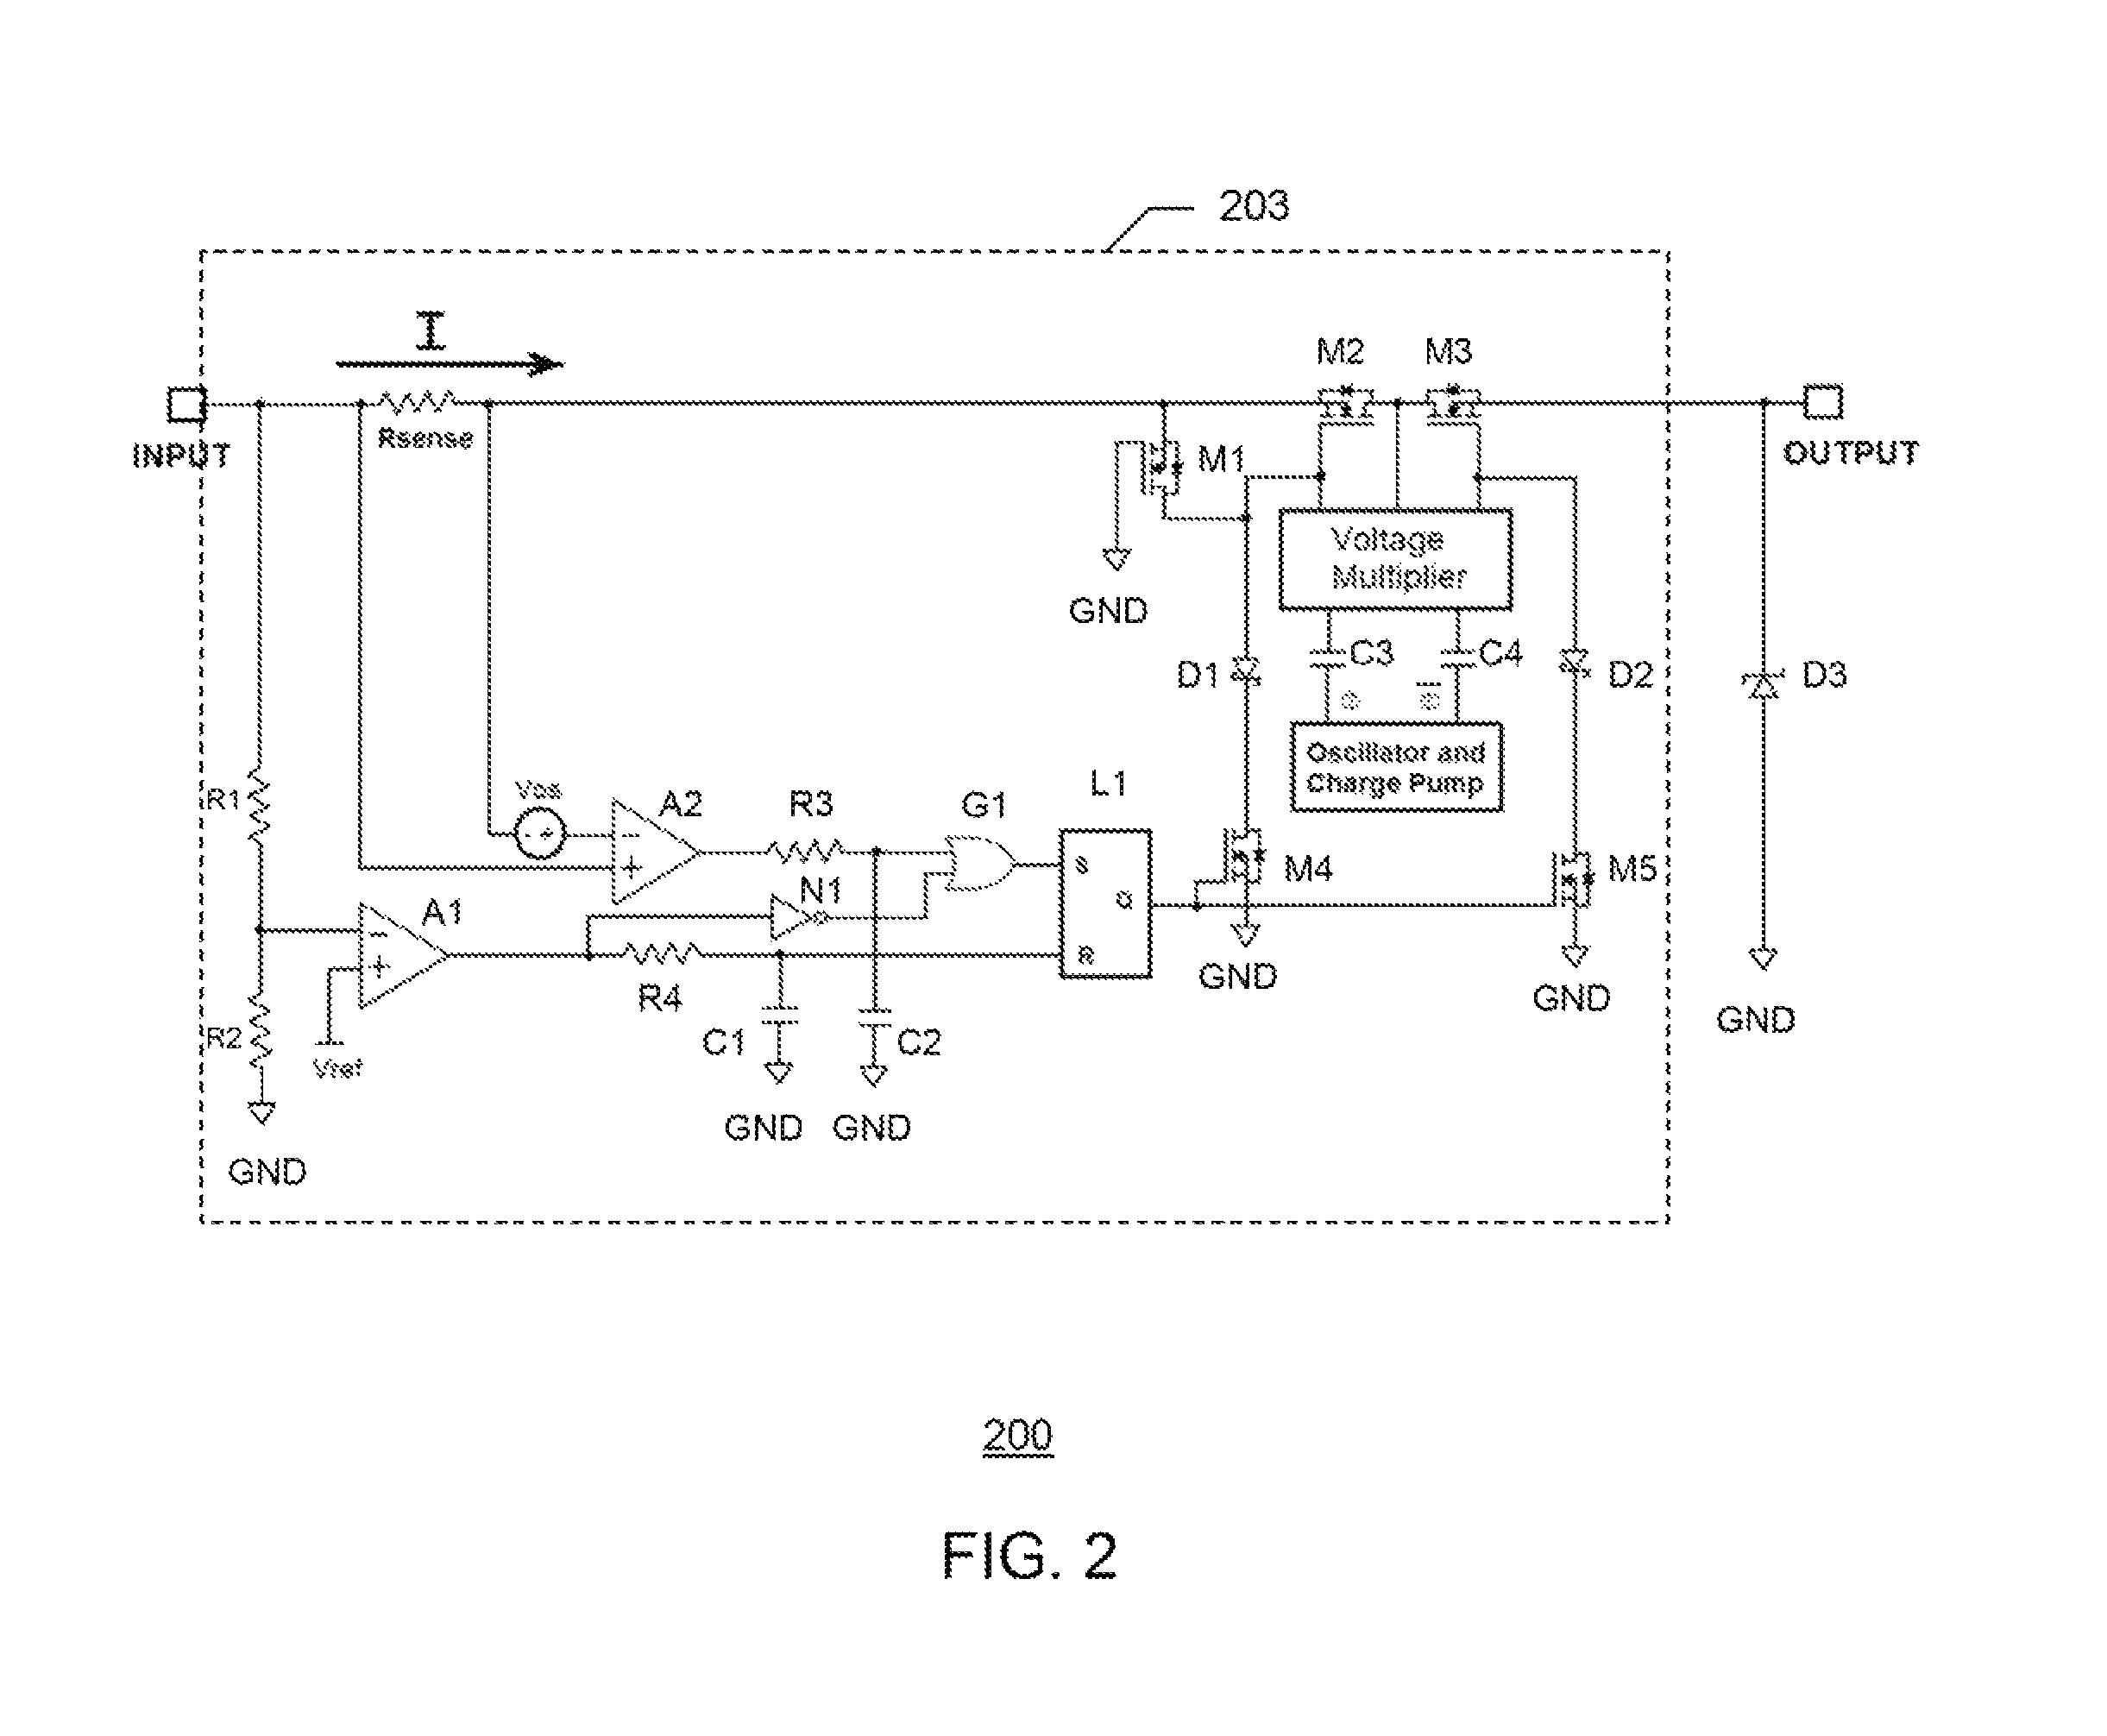 System and method for fast-acting power protection